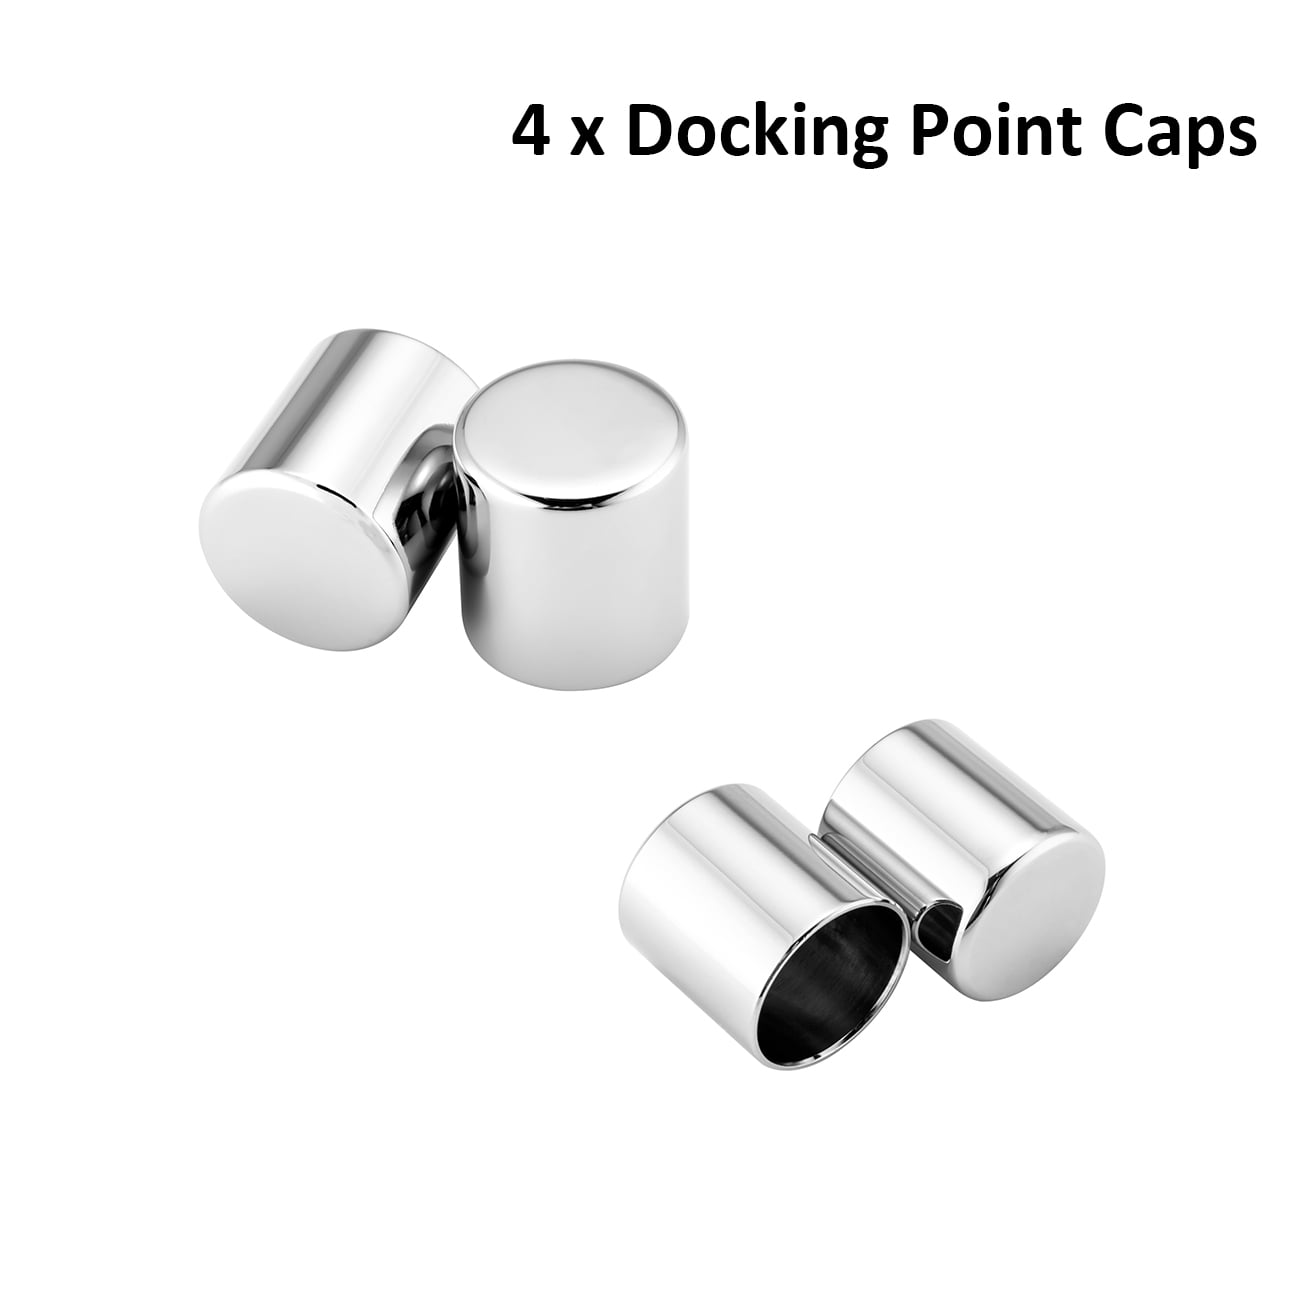 4X Billet Docking Hardware Point Magnetic Cover Cap For Harley Softail Road King 